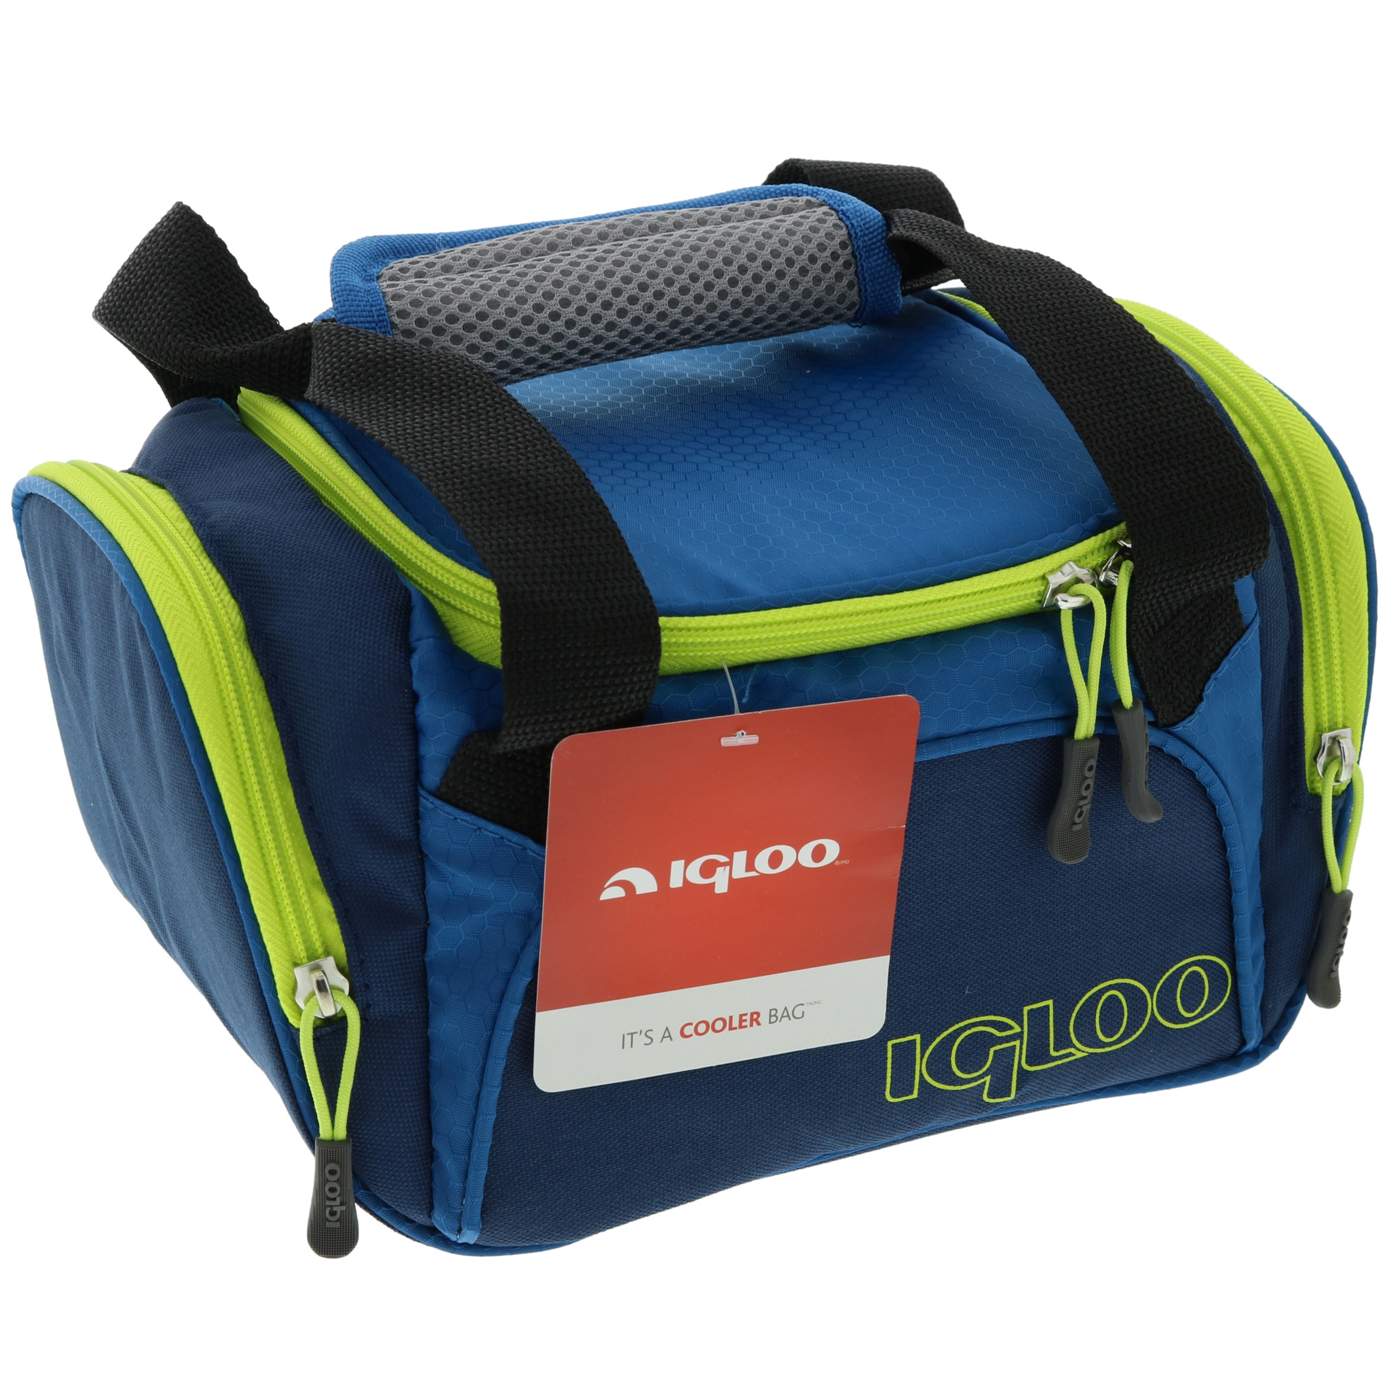 Igloo Small Duffel Cooler Bag, Assorted Colors; image 2 of 2